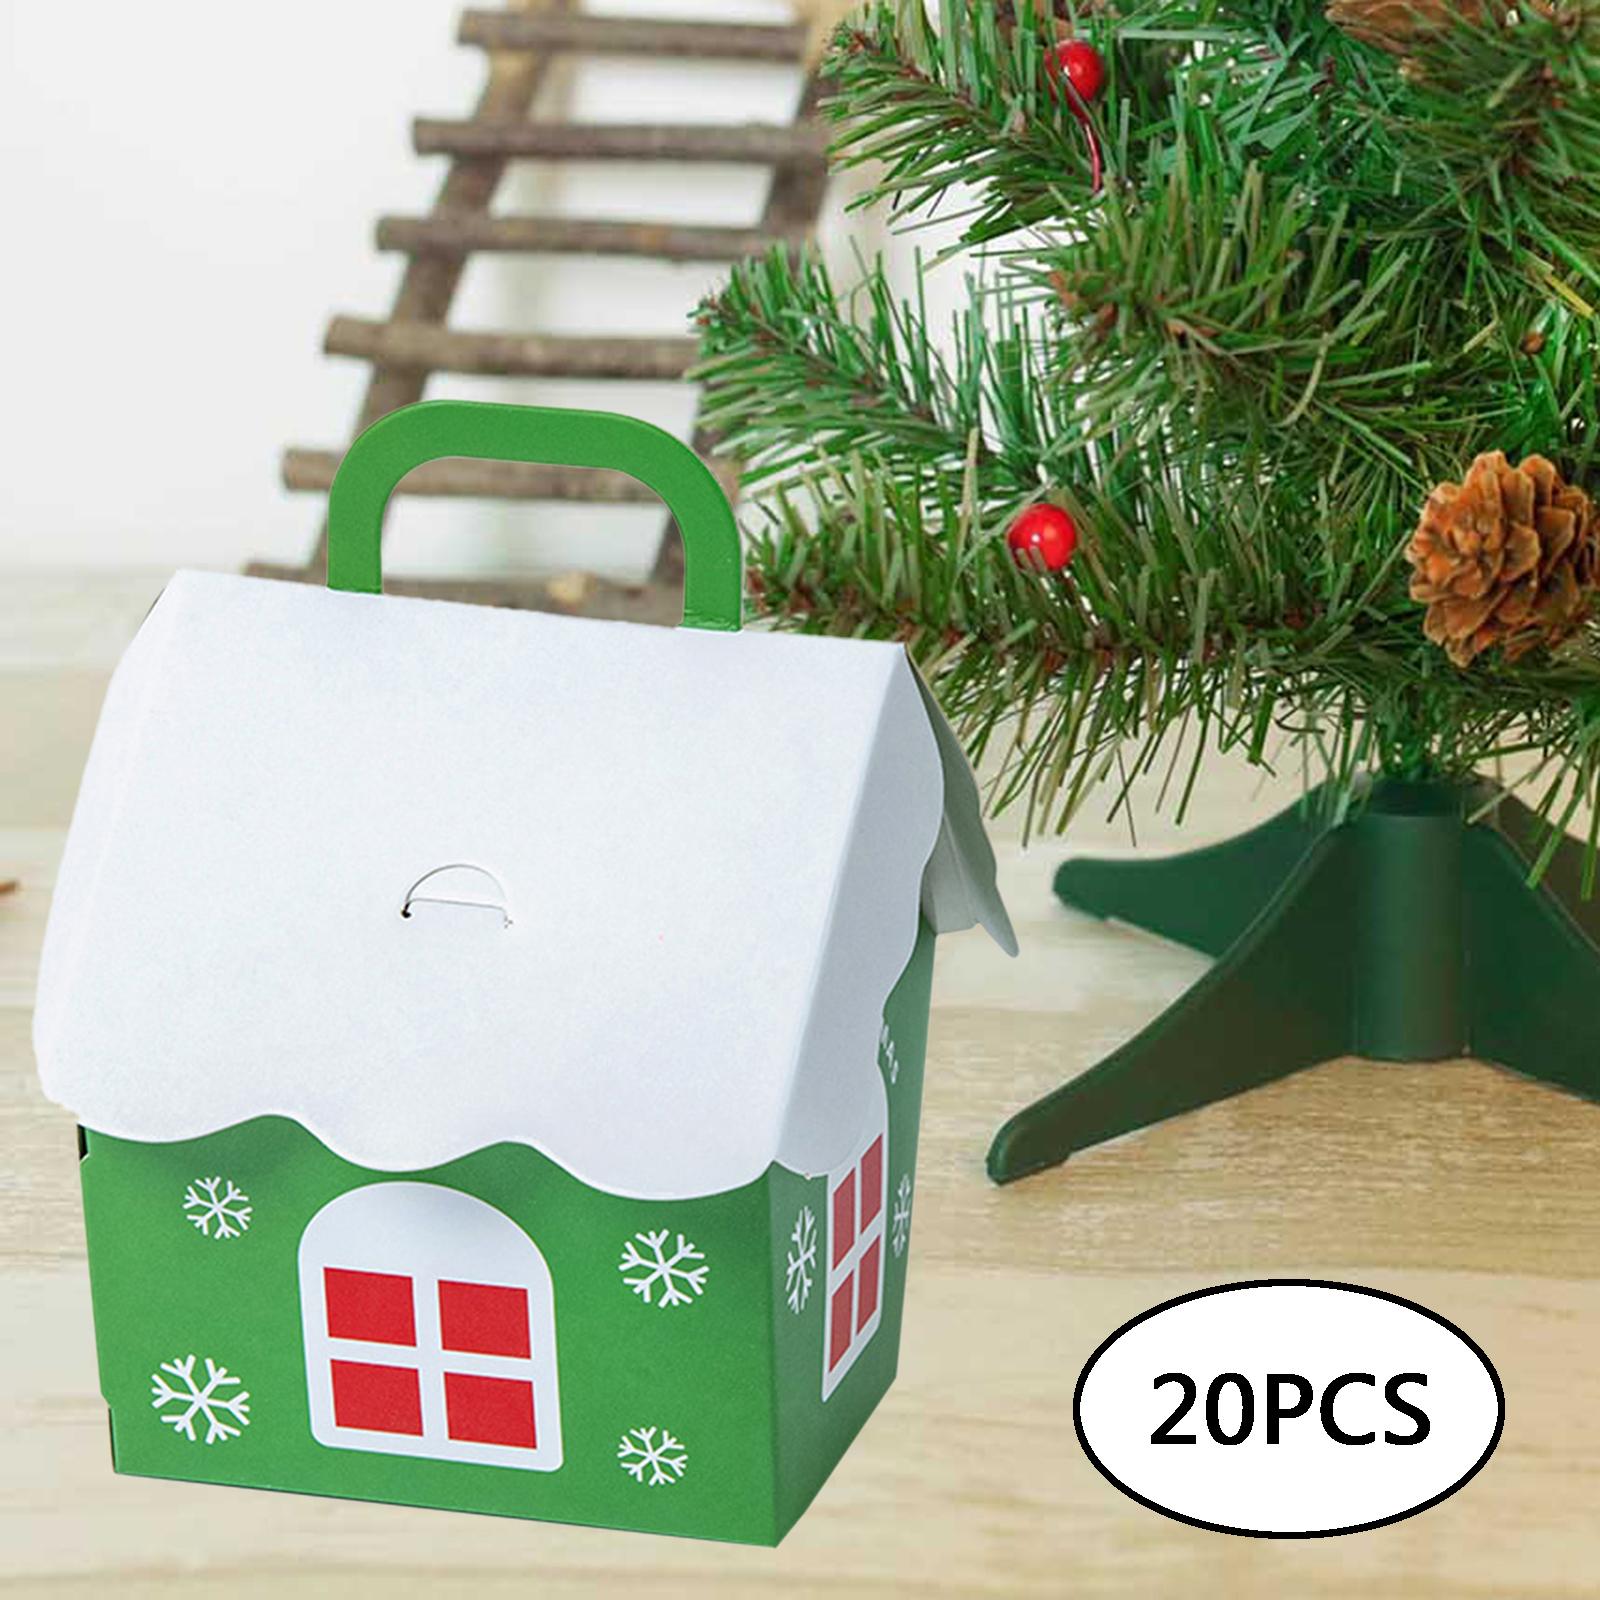 20 Pcs Gift Boxes Christmas Bag Wedding Party Supplies Birthdays Party Favor Green